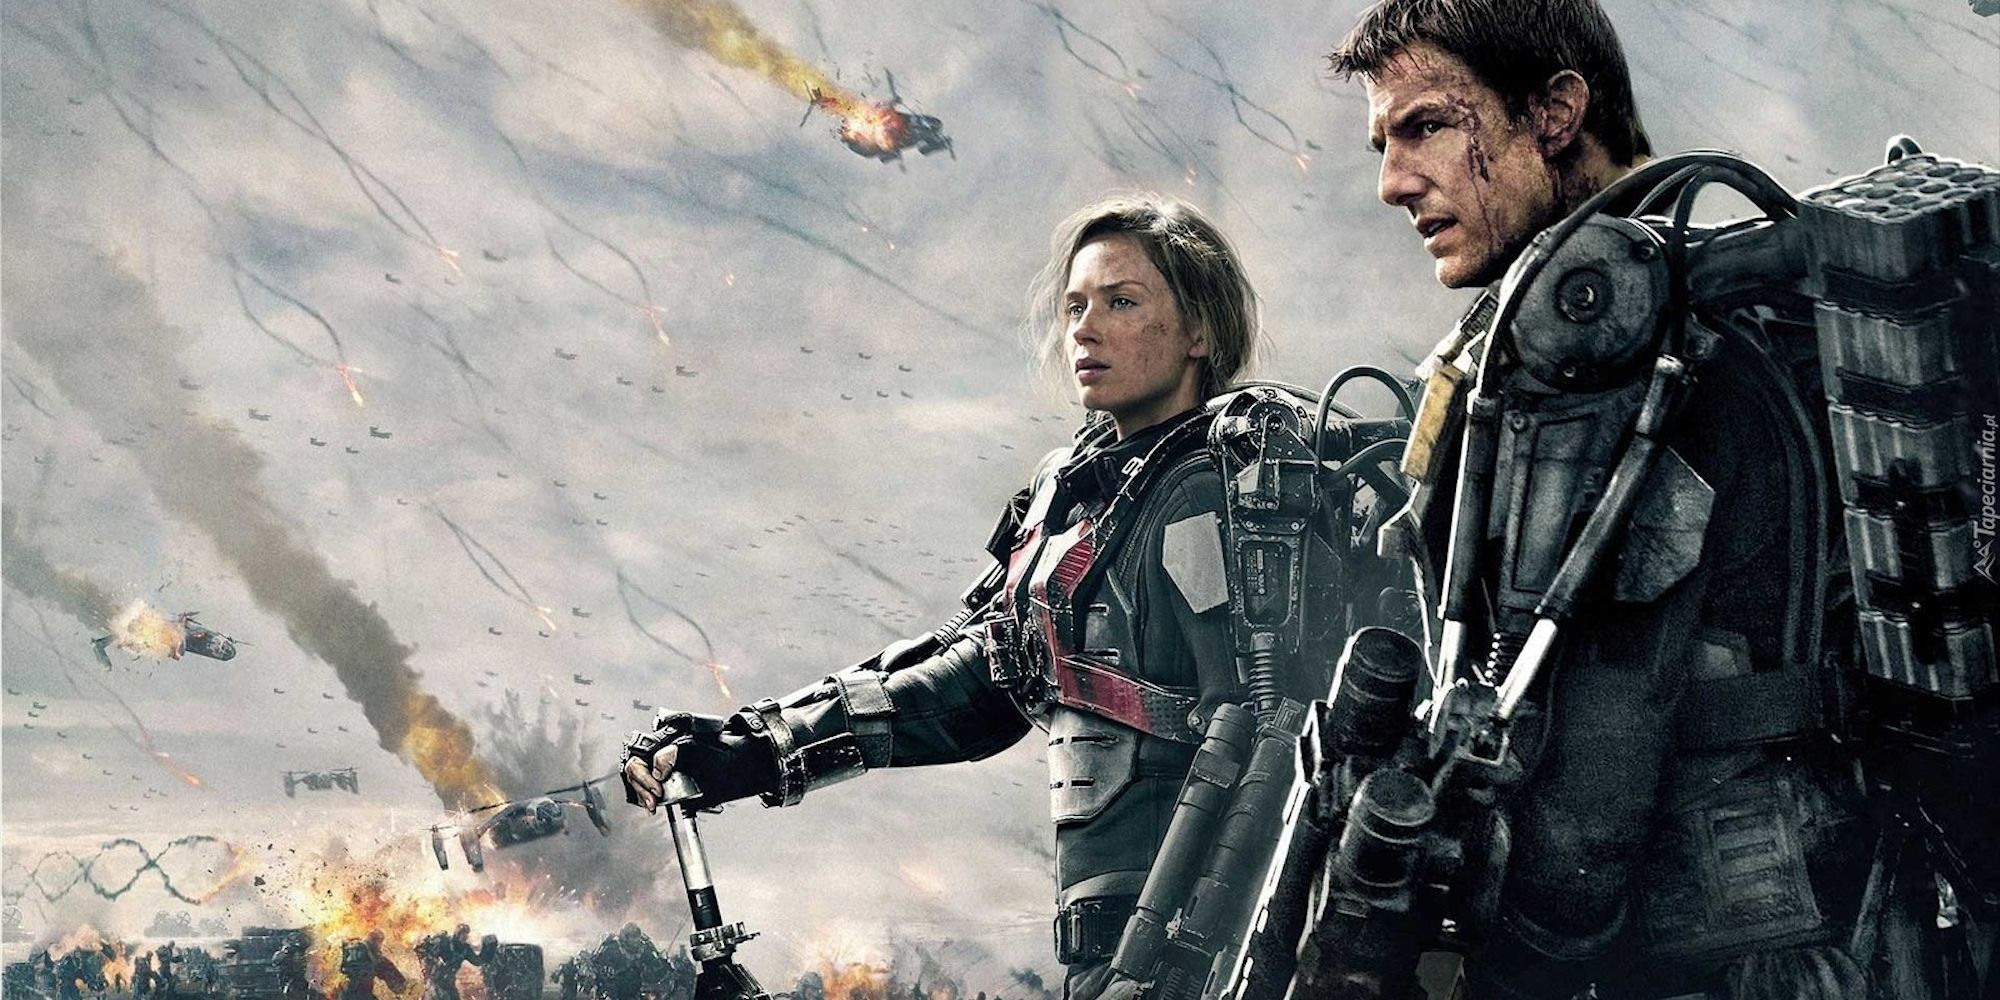 Emily Blunt and Tom Cruise looking to the distance in a poster for Edge of Tomorrow.